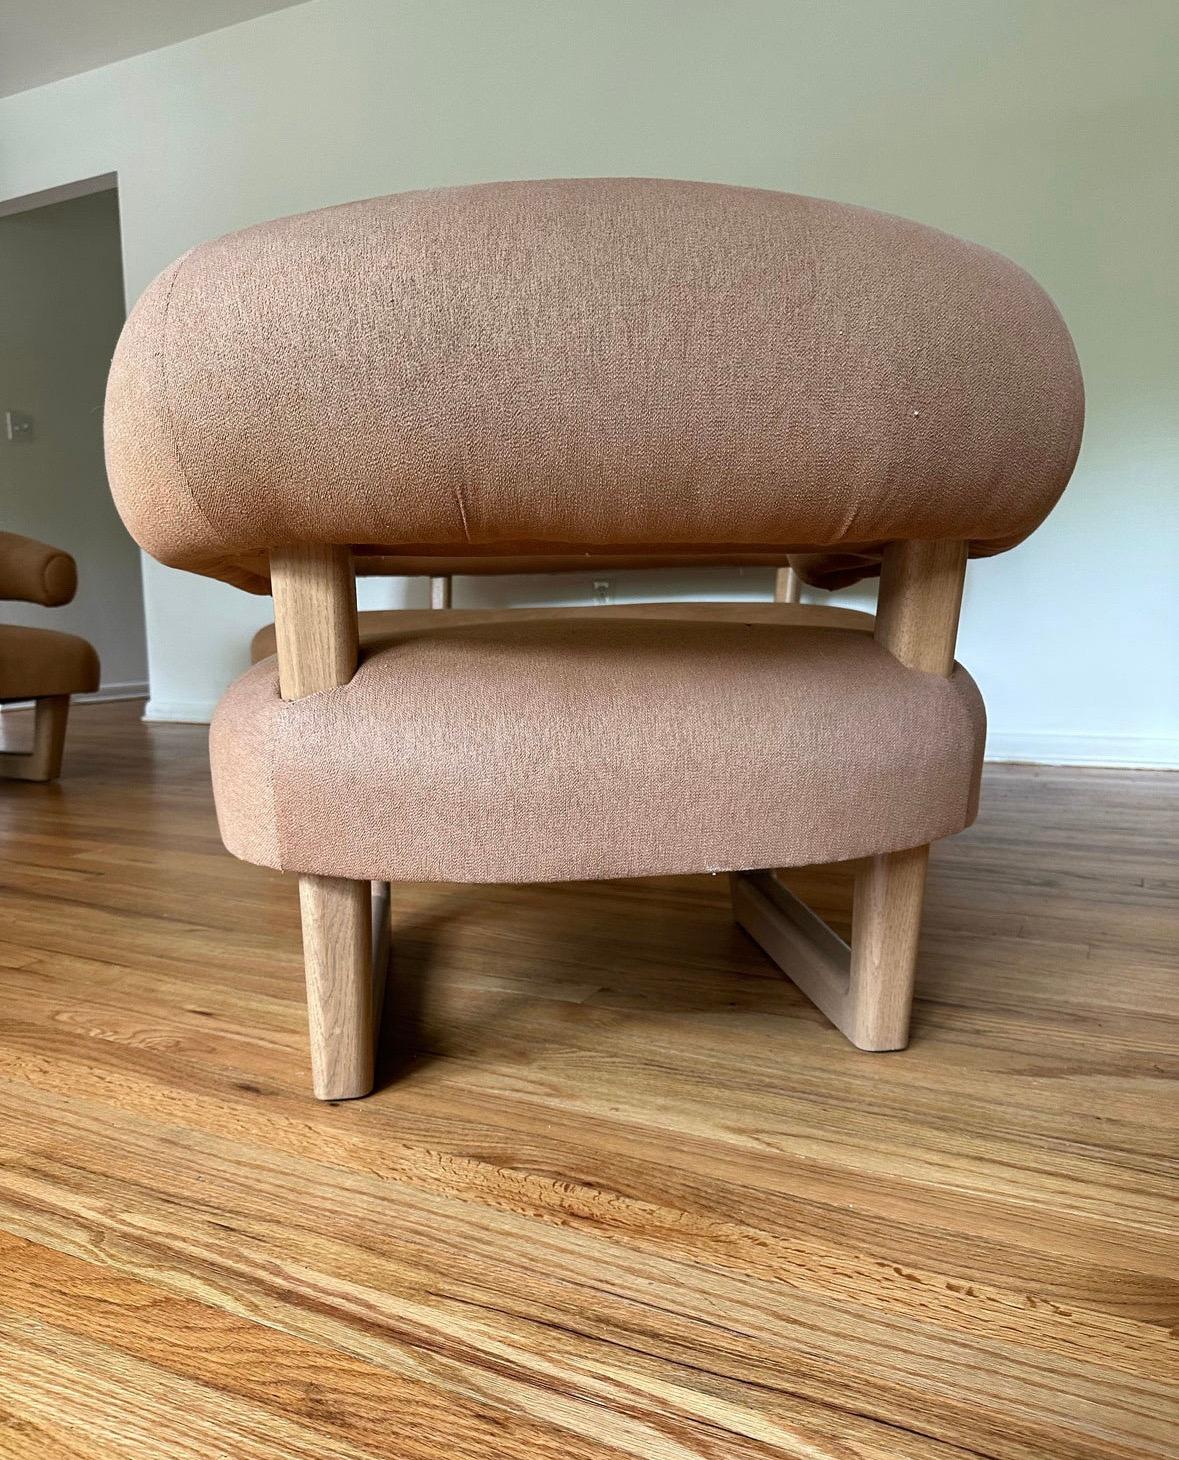 Pair of Armchairs by Peter Marino for the Getty Nyc French modernist organic  1